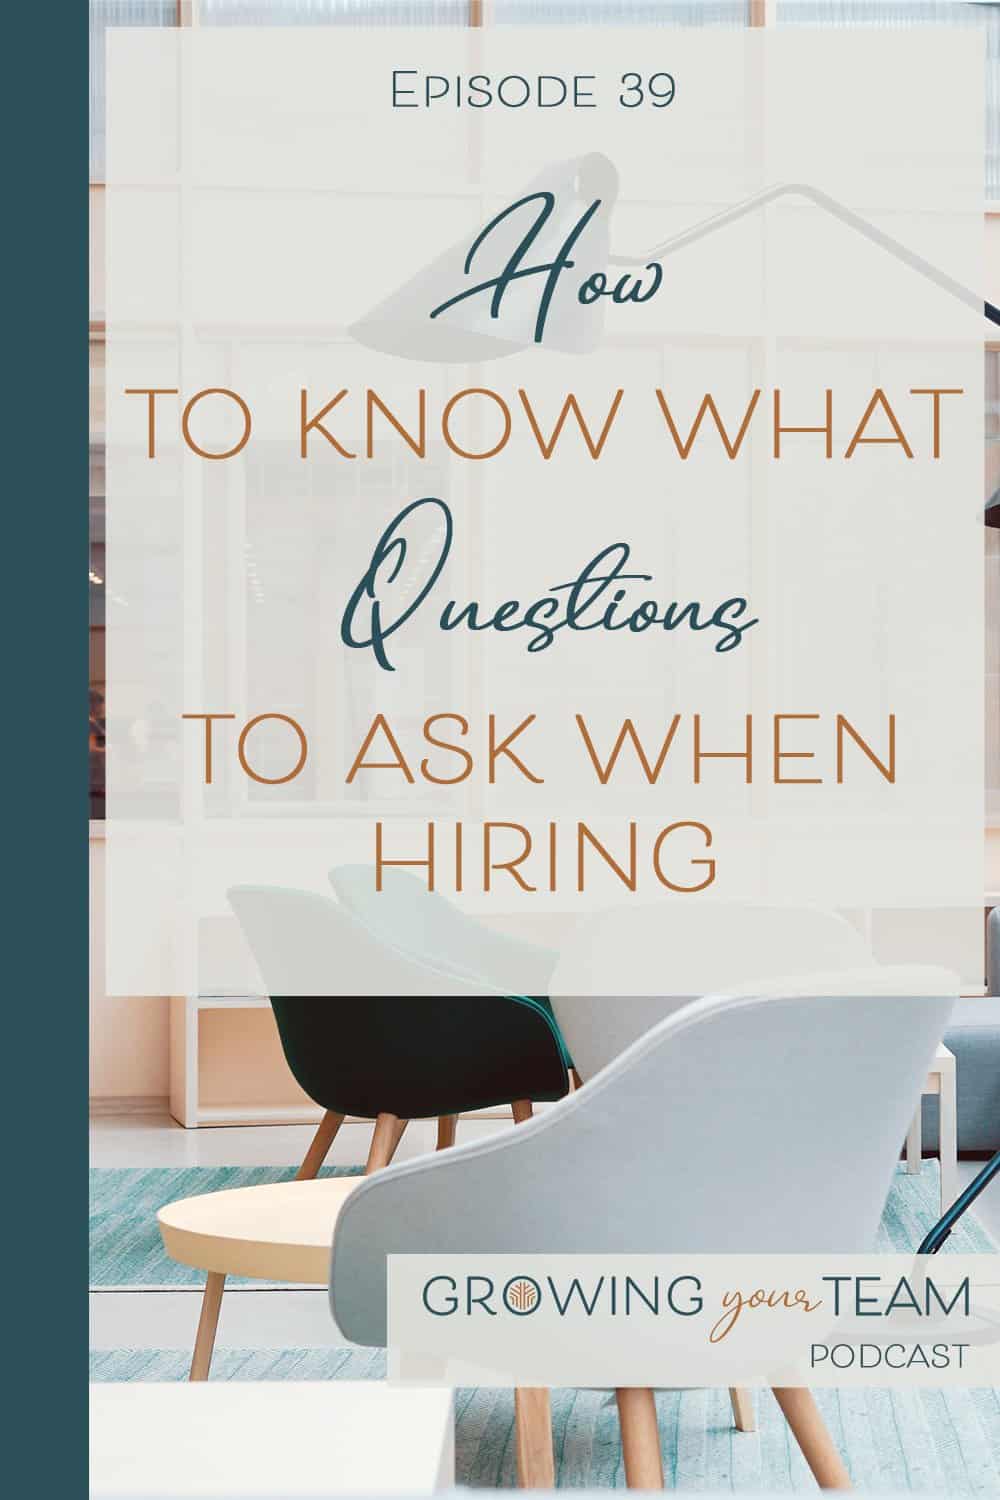 Questions to Ask When Hiring, Growing You Team Podcast, Jamie Van Cuyk, Small Business